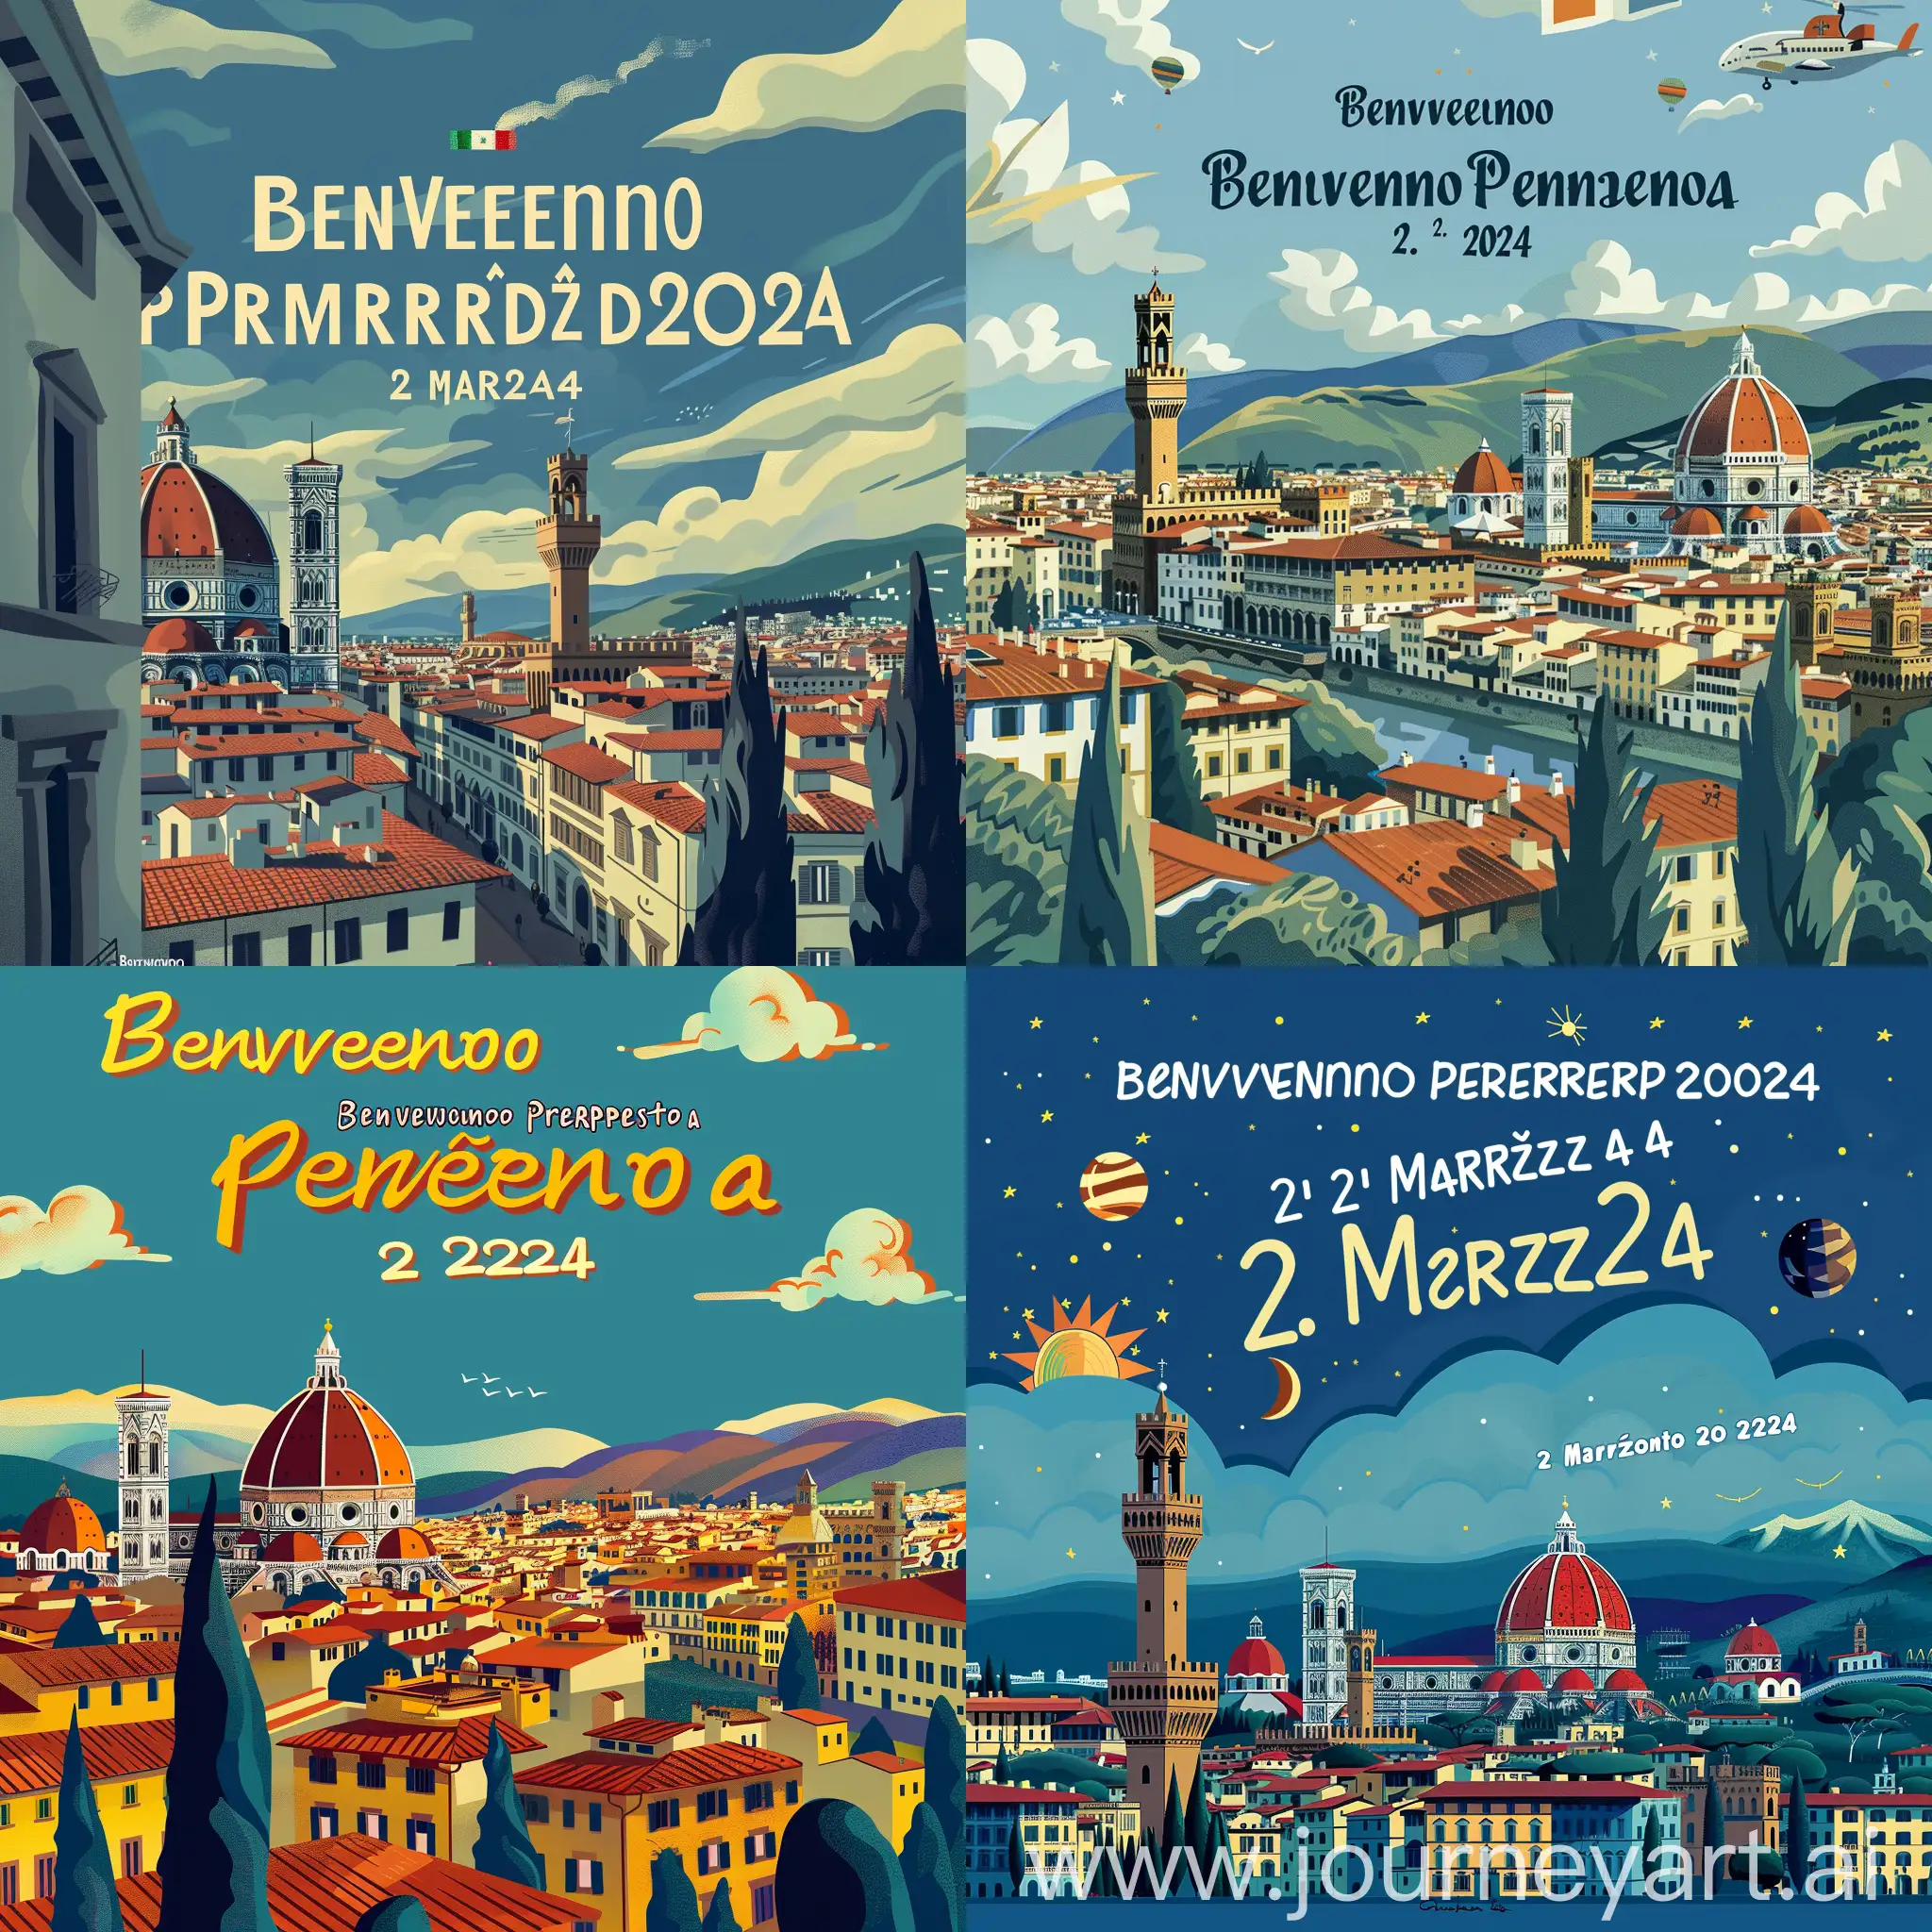 Make a poster announcing that the President of the Italian Republic is coming to Florence on 2 March 2024. Put famous places in Florence and write the text in Italian "Benvenuto Presidente a Firenze" and then put the date "2 marzo 2024"